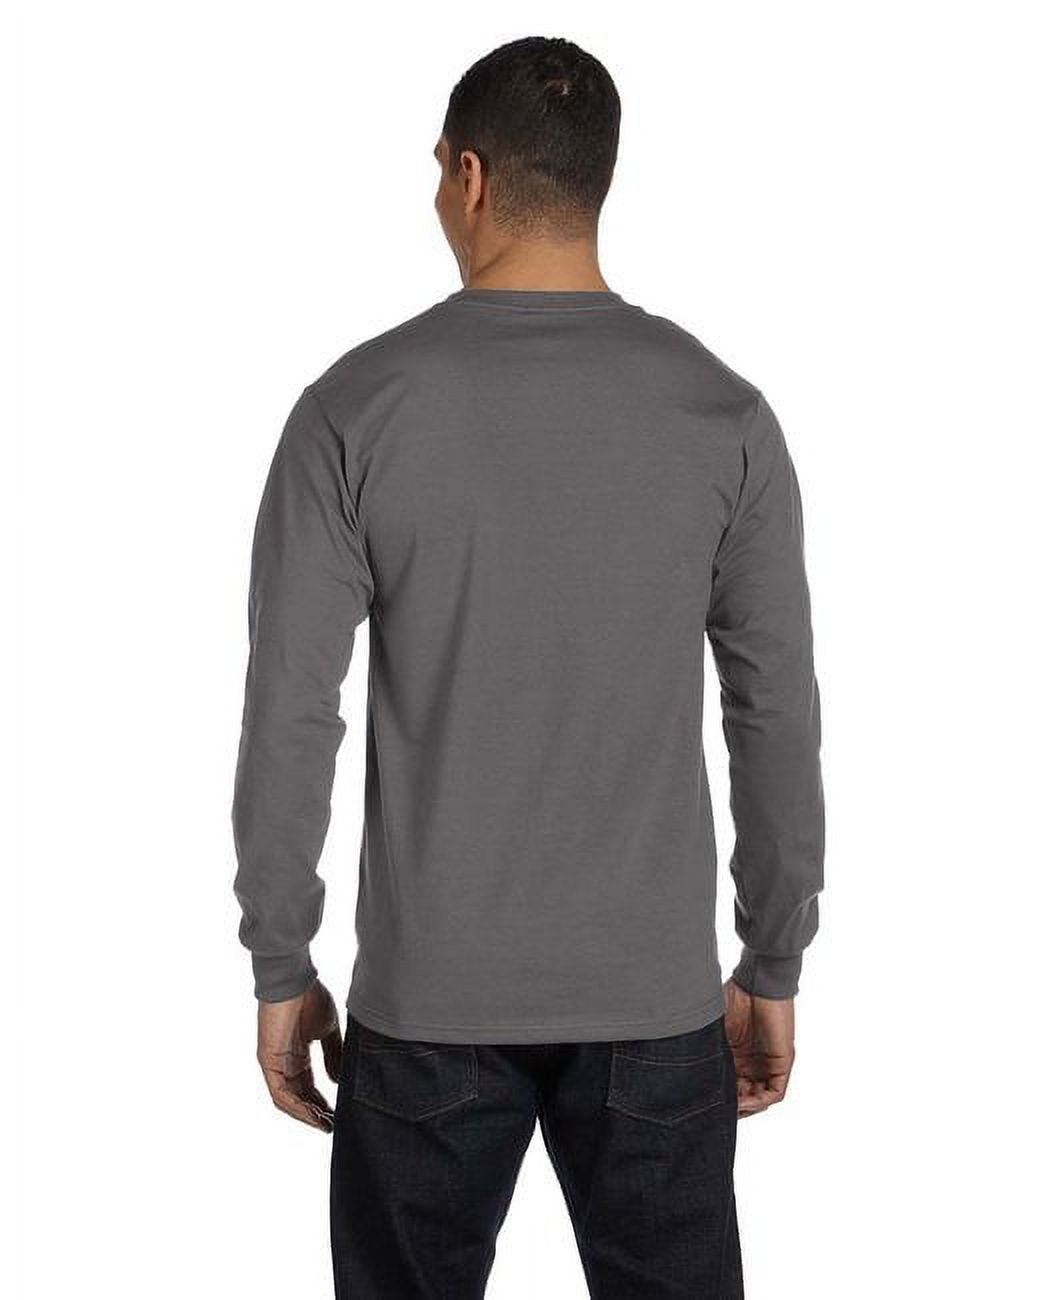 Hanes Men's and Big Men's Premium Beefy-T Long Sleeve T-Shirt, Up To 3XL - image 2 of 3